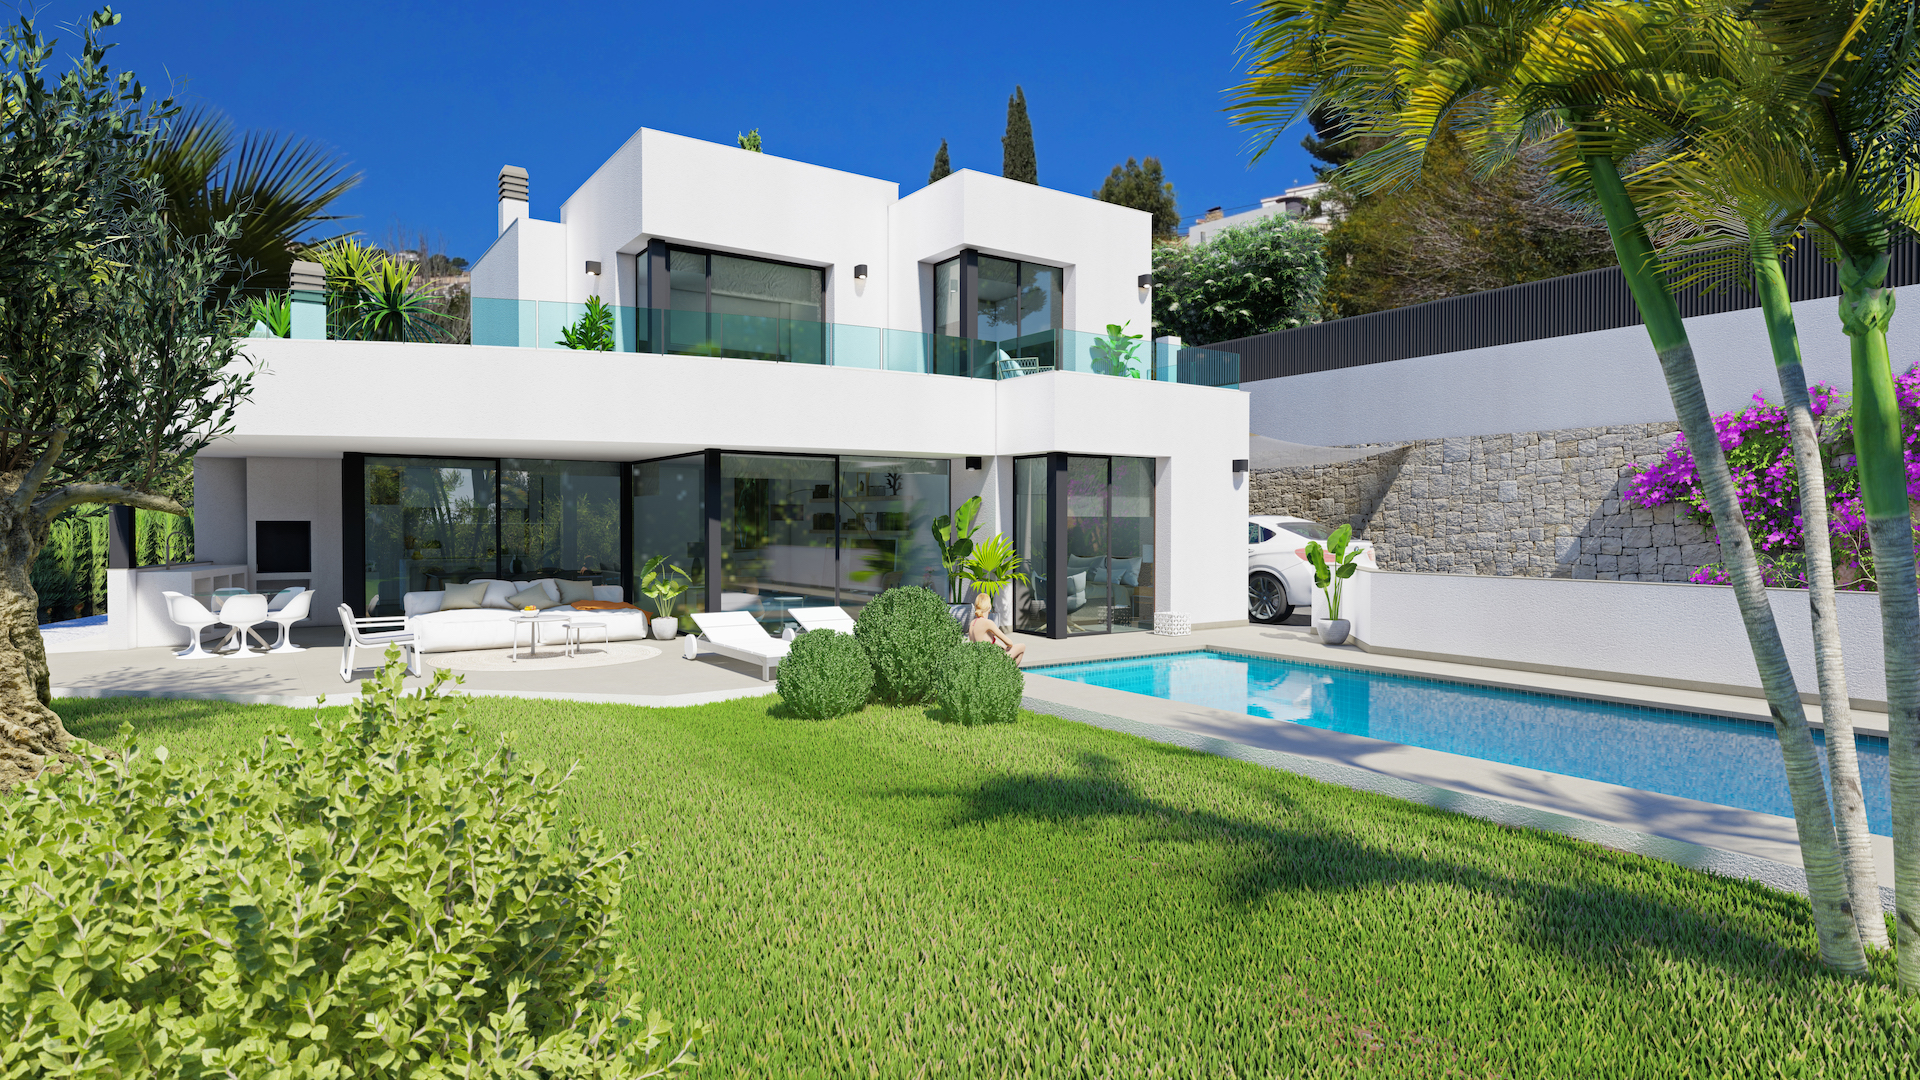 Fotogalería - 1 - Exceptional homes in the Costa Blanca. Unparalleled Service. Exceptional properties in the Costa Blanca